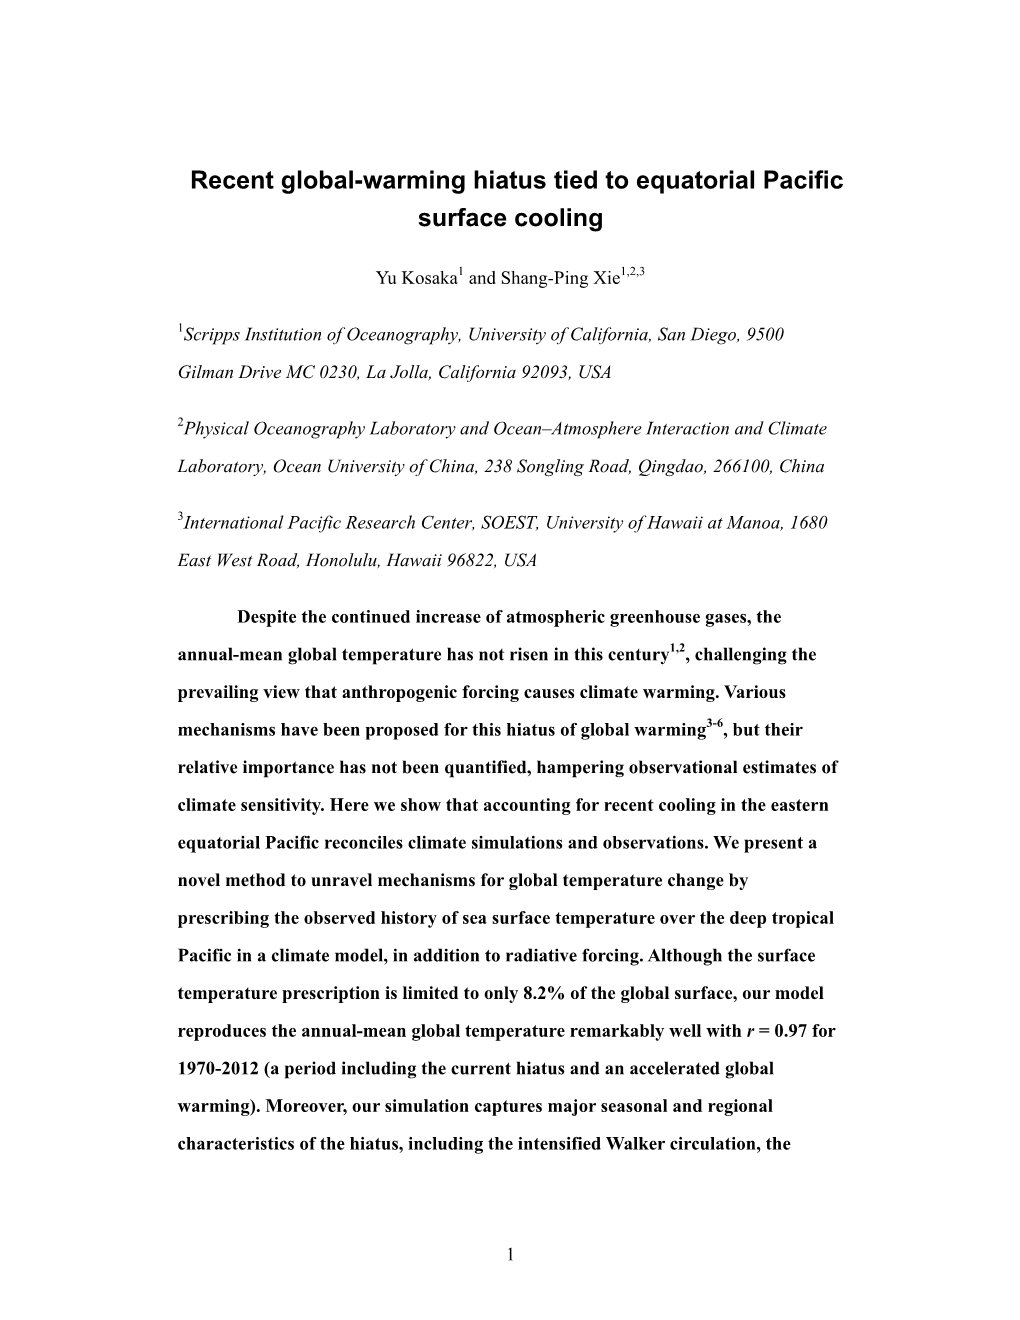 Recent Global-Warming Hiatus Tied to Equatorial Pacific Surface Cooling